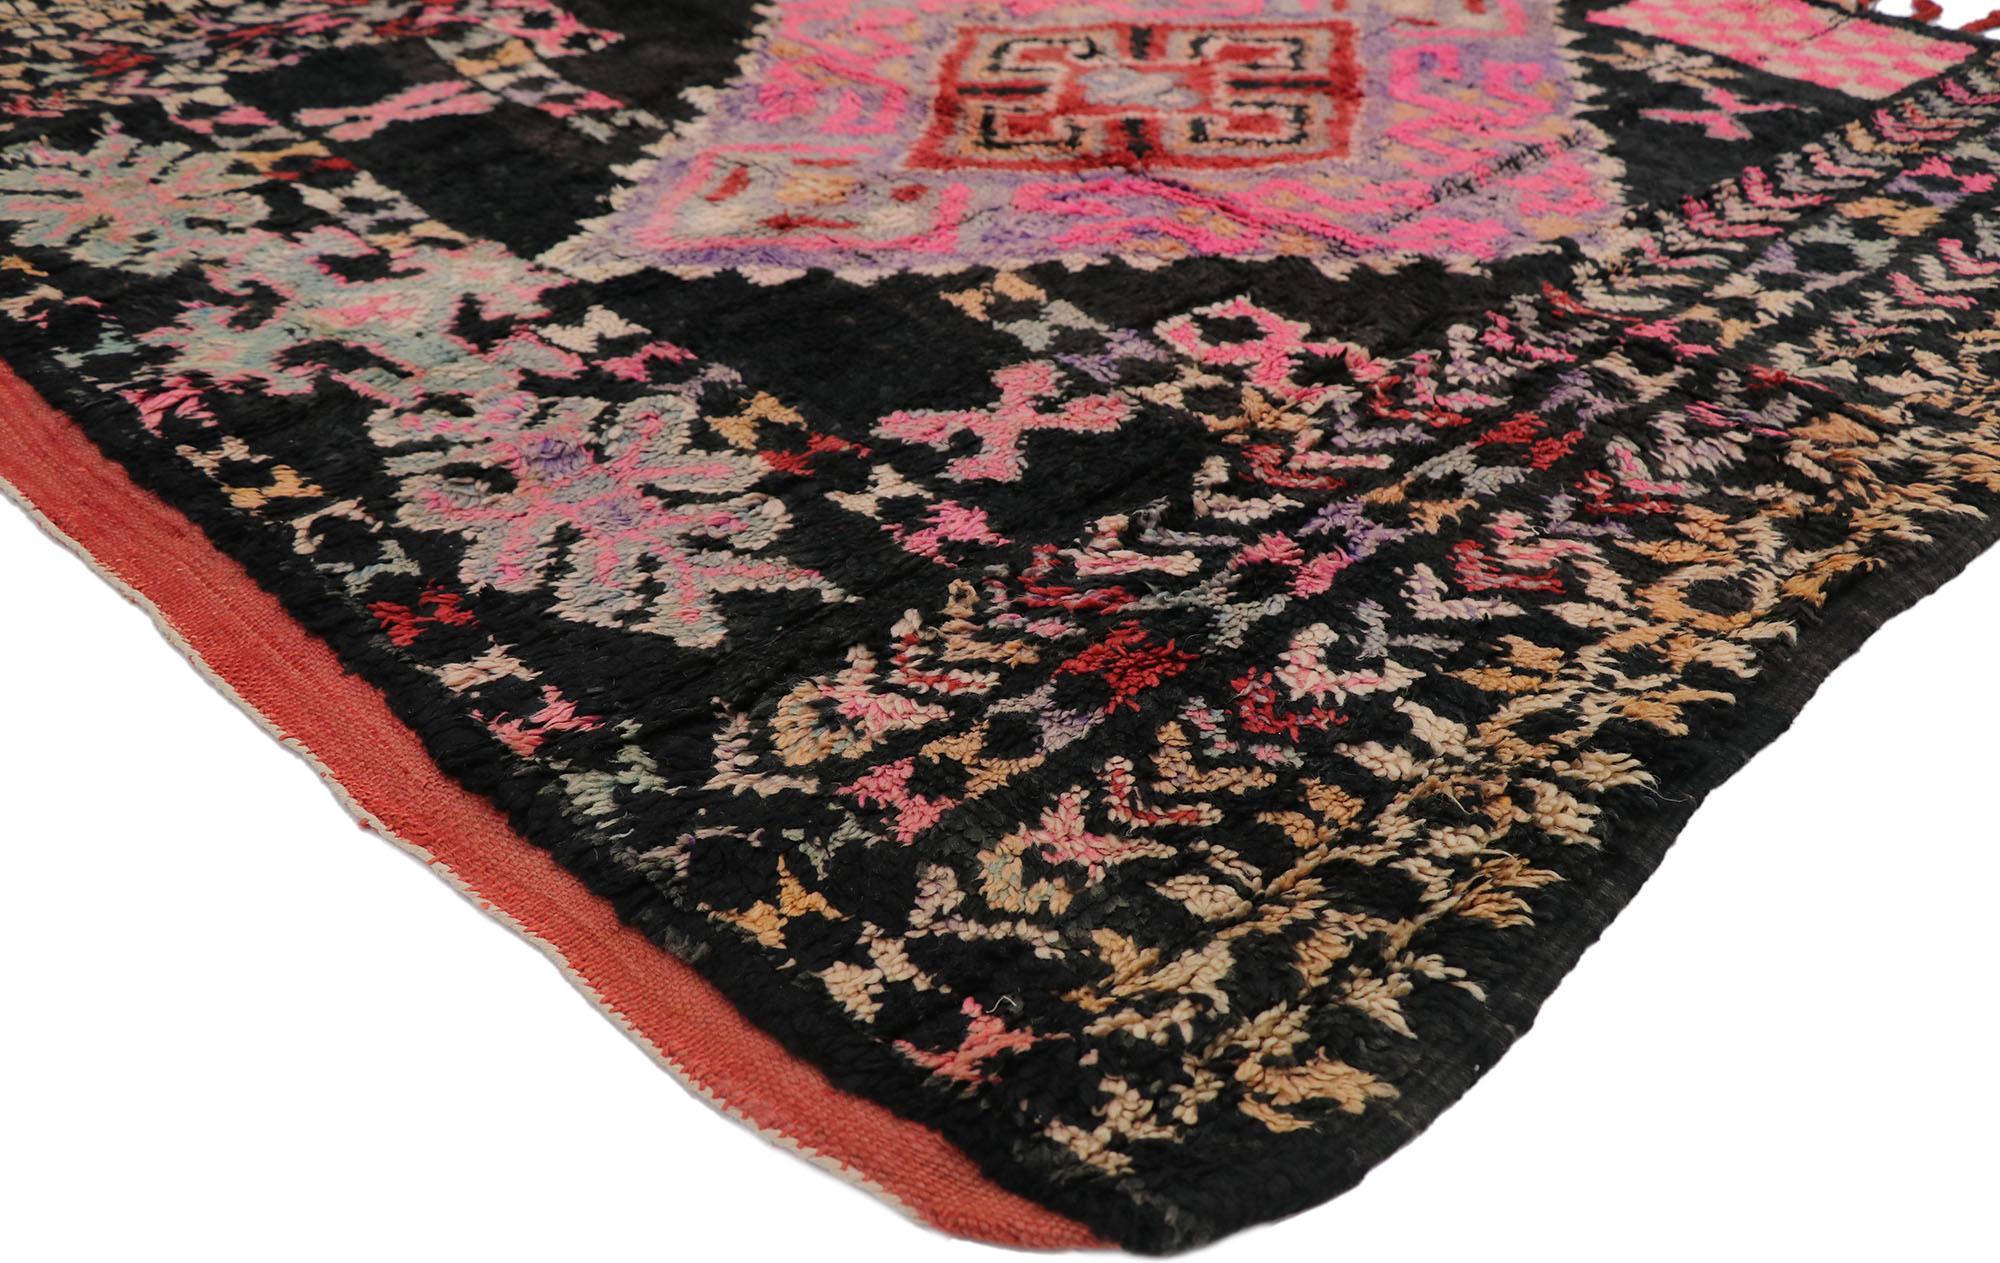 21258 Vintage Boujad Moroccan Rug, 05'00 x 05'06. A Boujad rug is a type of traditional handwoven Moroccan rug that originates from the Boujad region in the Haouz plains of the Middle Atlas Mountains. These rugs are crafted by the indigenous Berber